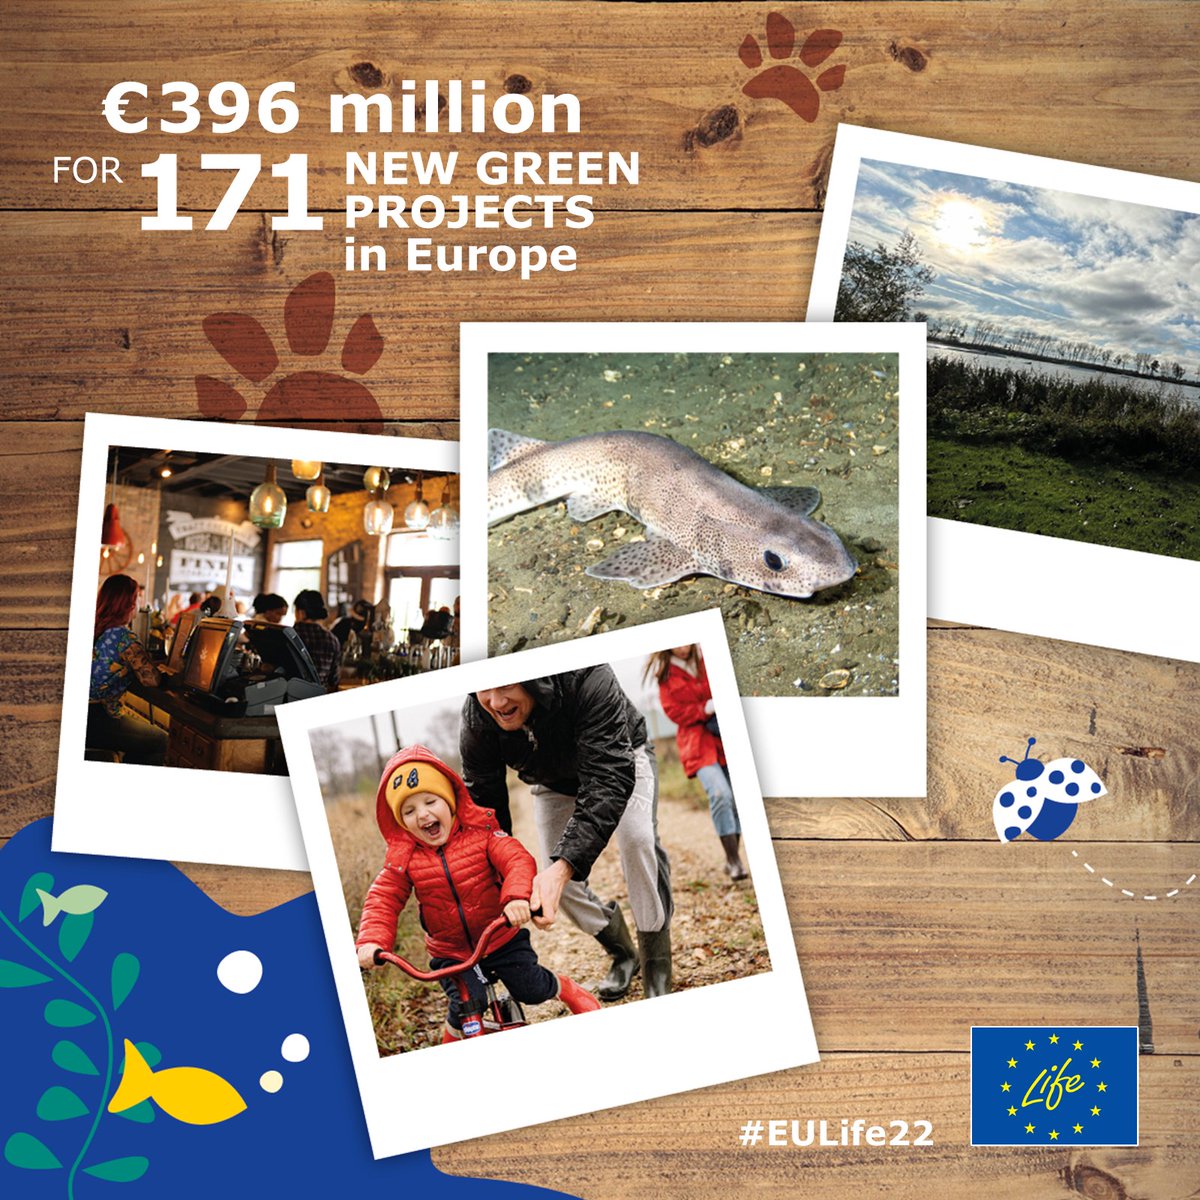 Big news from the #LIFEProgramme!🌍💚 The @EU_Commission invests €396 million in 171 new #EULife22 projects on: 🌳 Nature & #EUBiodiversity ♻️#CircularEconomy & Quality of Life 🌡️#ClimateAction ⚡ Clean #EnergyTransition Meet all new #LIFEProjects👇 europa.eu/!xkCX44